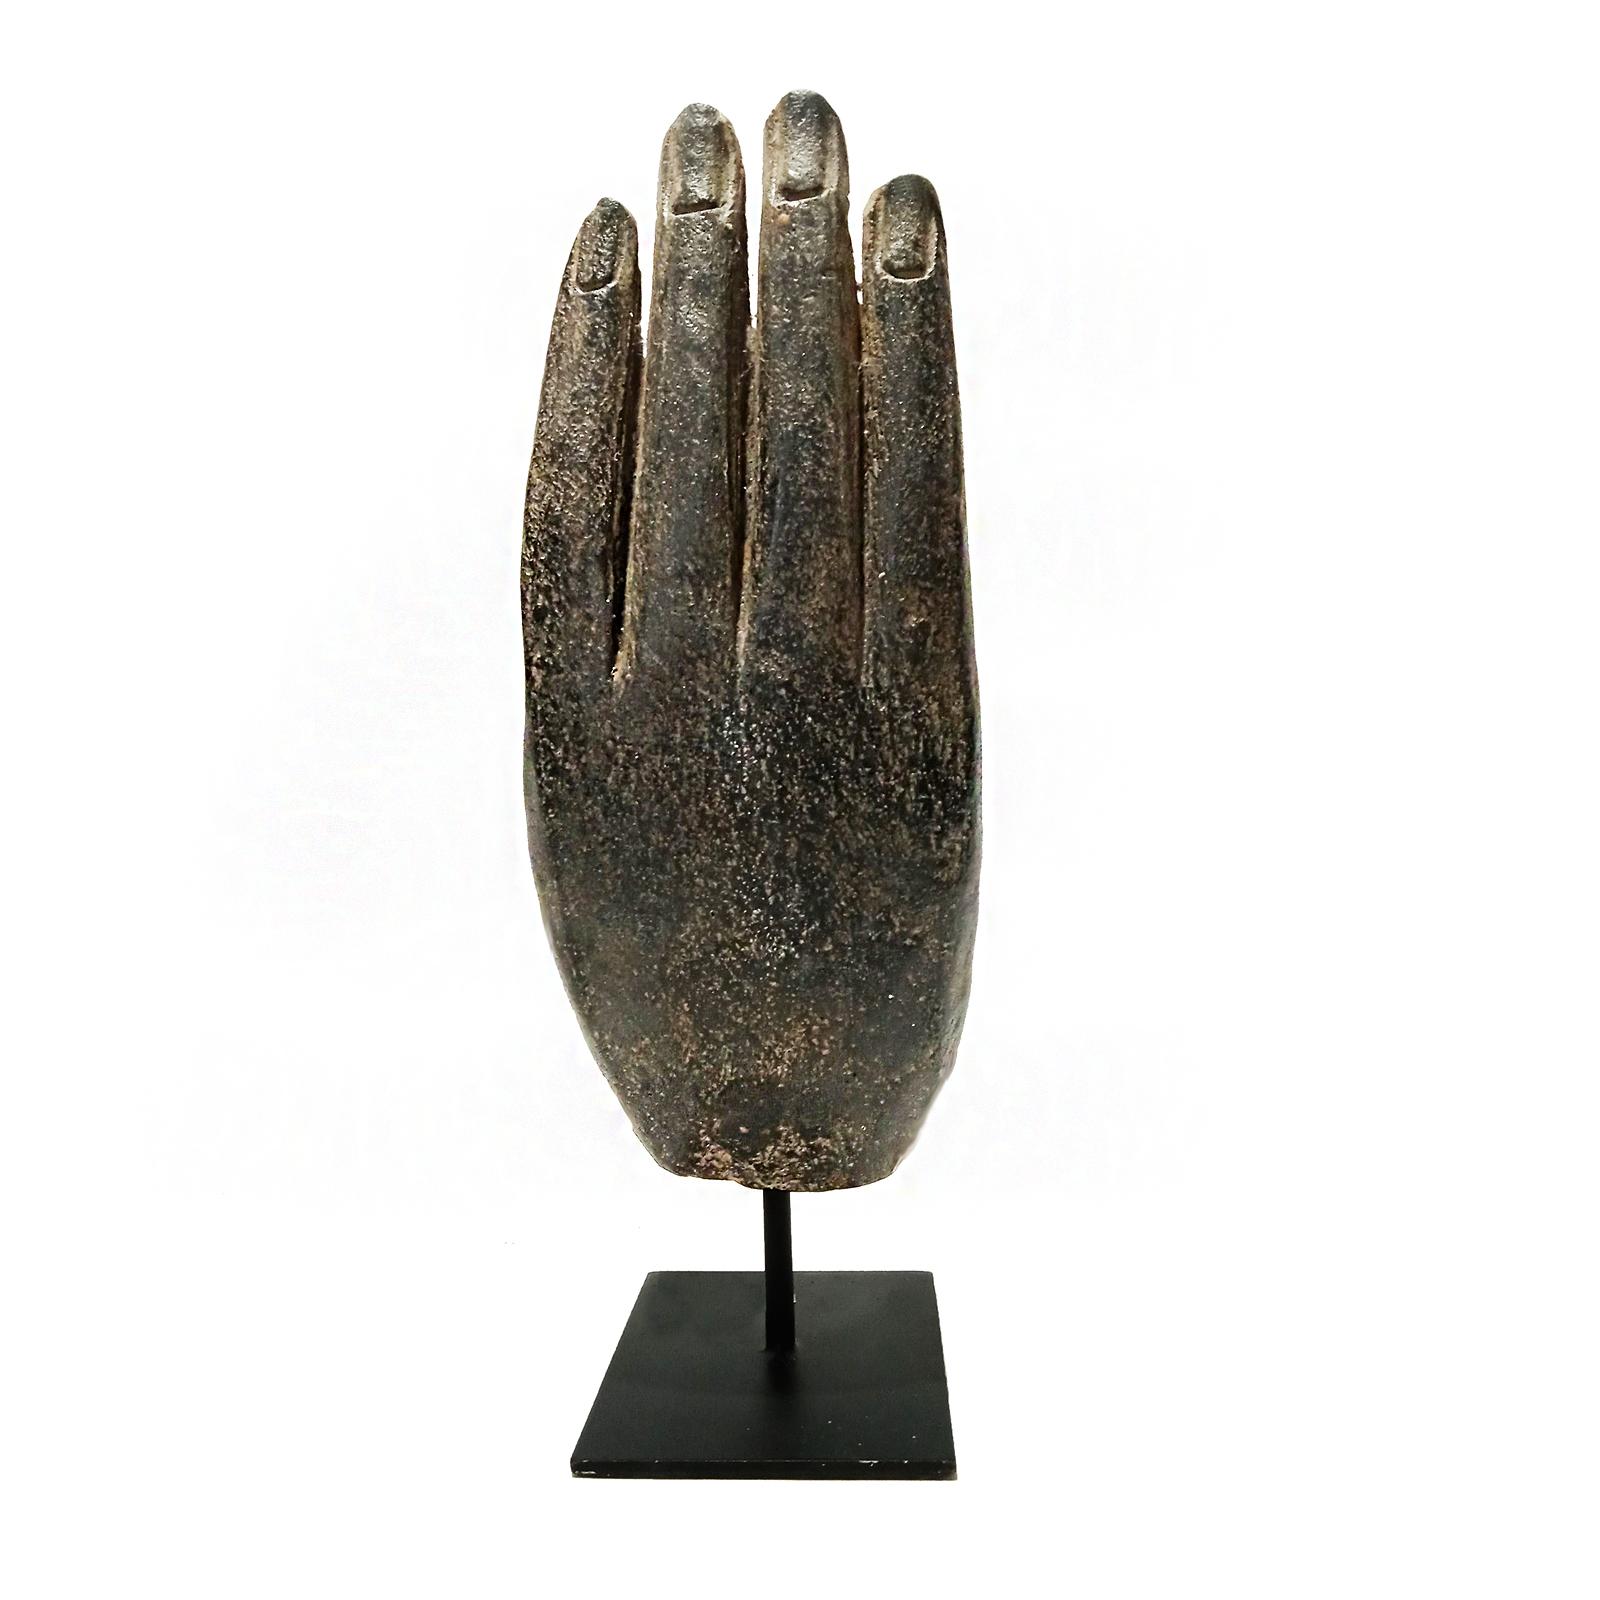 Three Volcanic Rock Hand Sculptures, Mid 20th Century For Sale 2